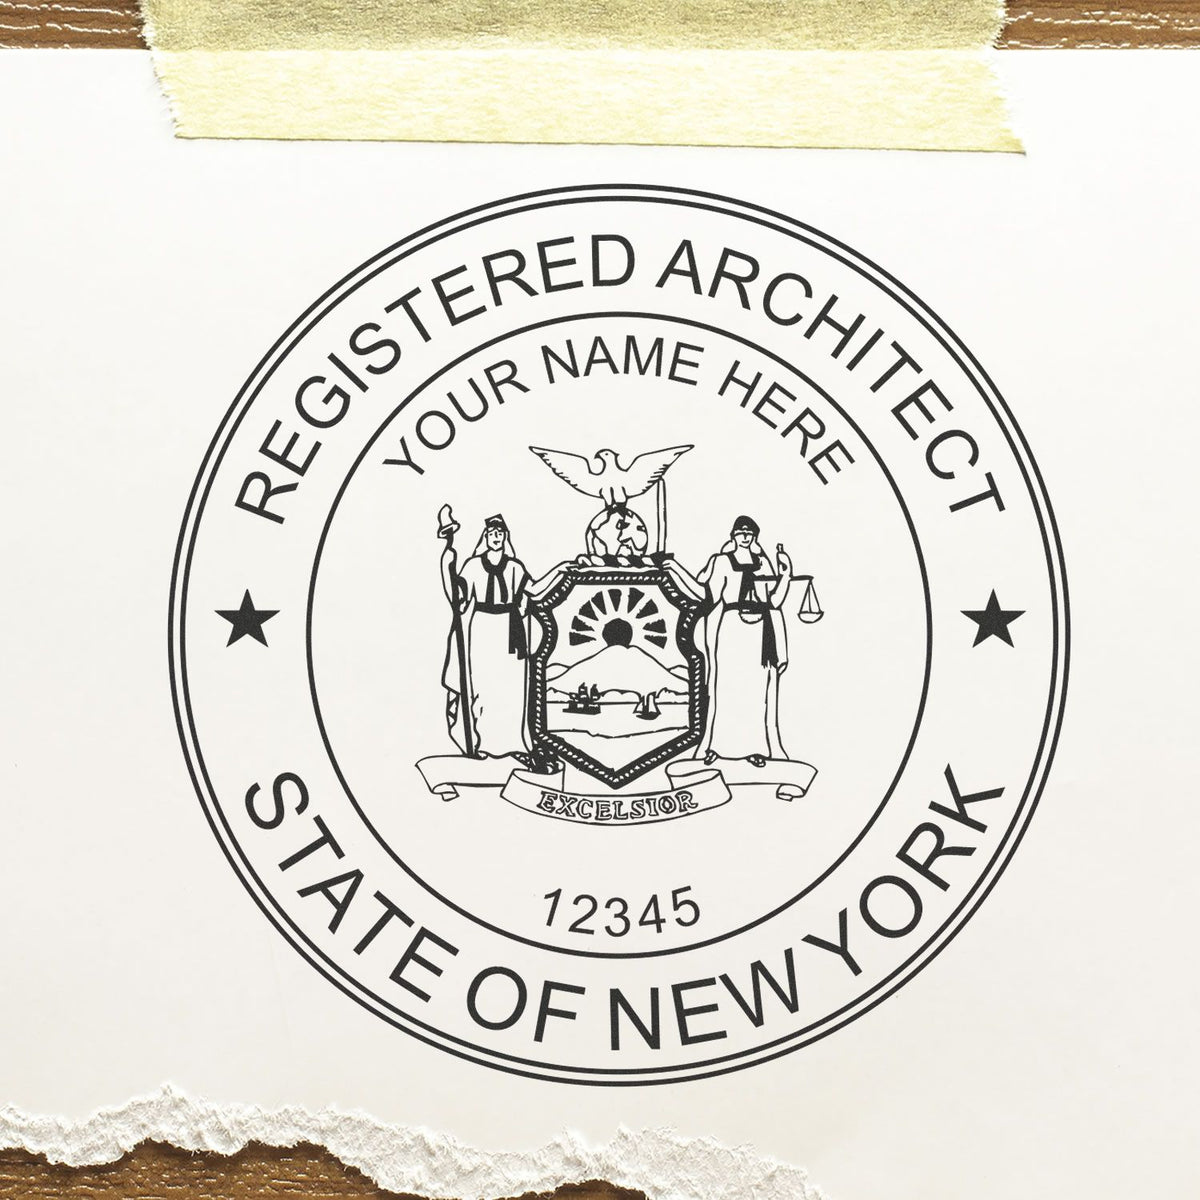 Slim Pre-Inked New York Architect Seal Stamp in use photo showing a stamped imprint of the Slim Pre-Inked New York Architect Seal Stamp